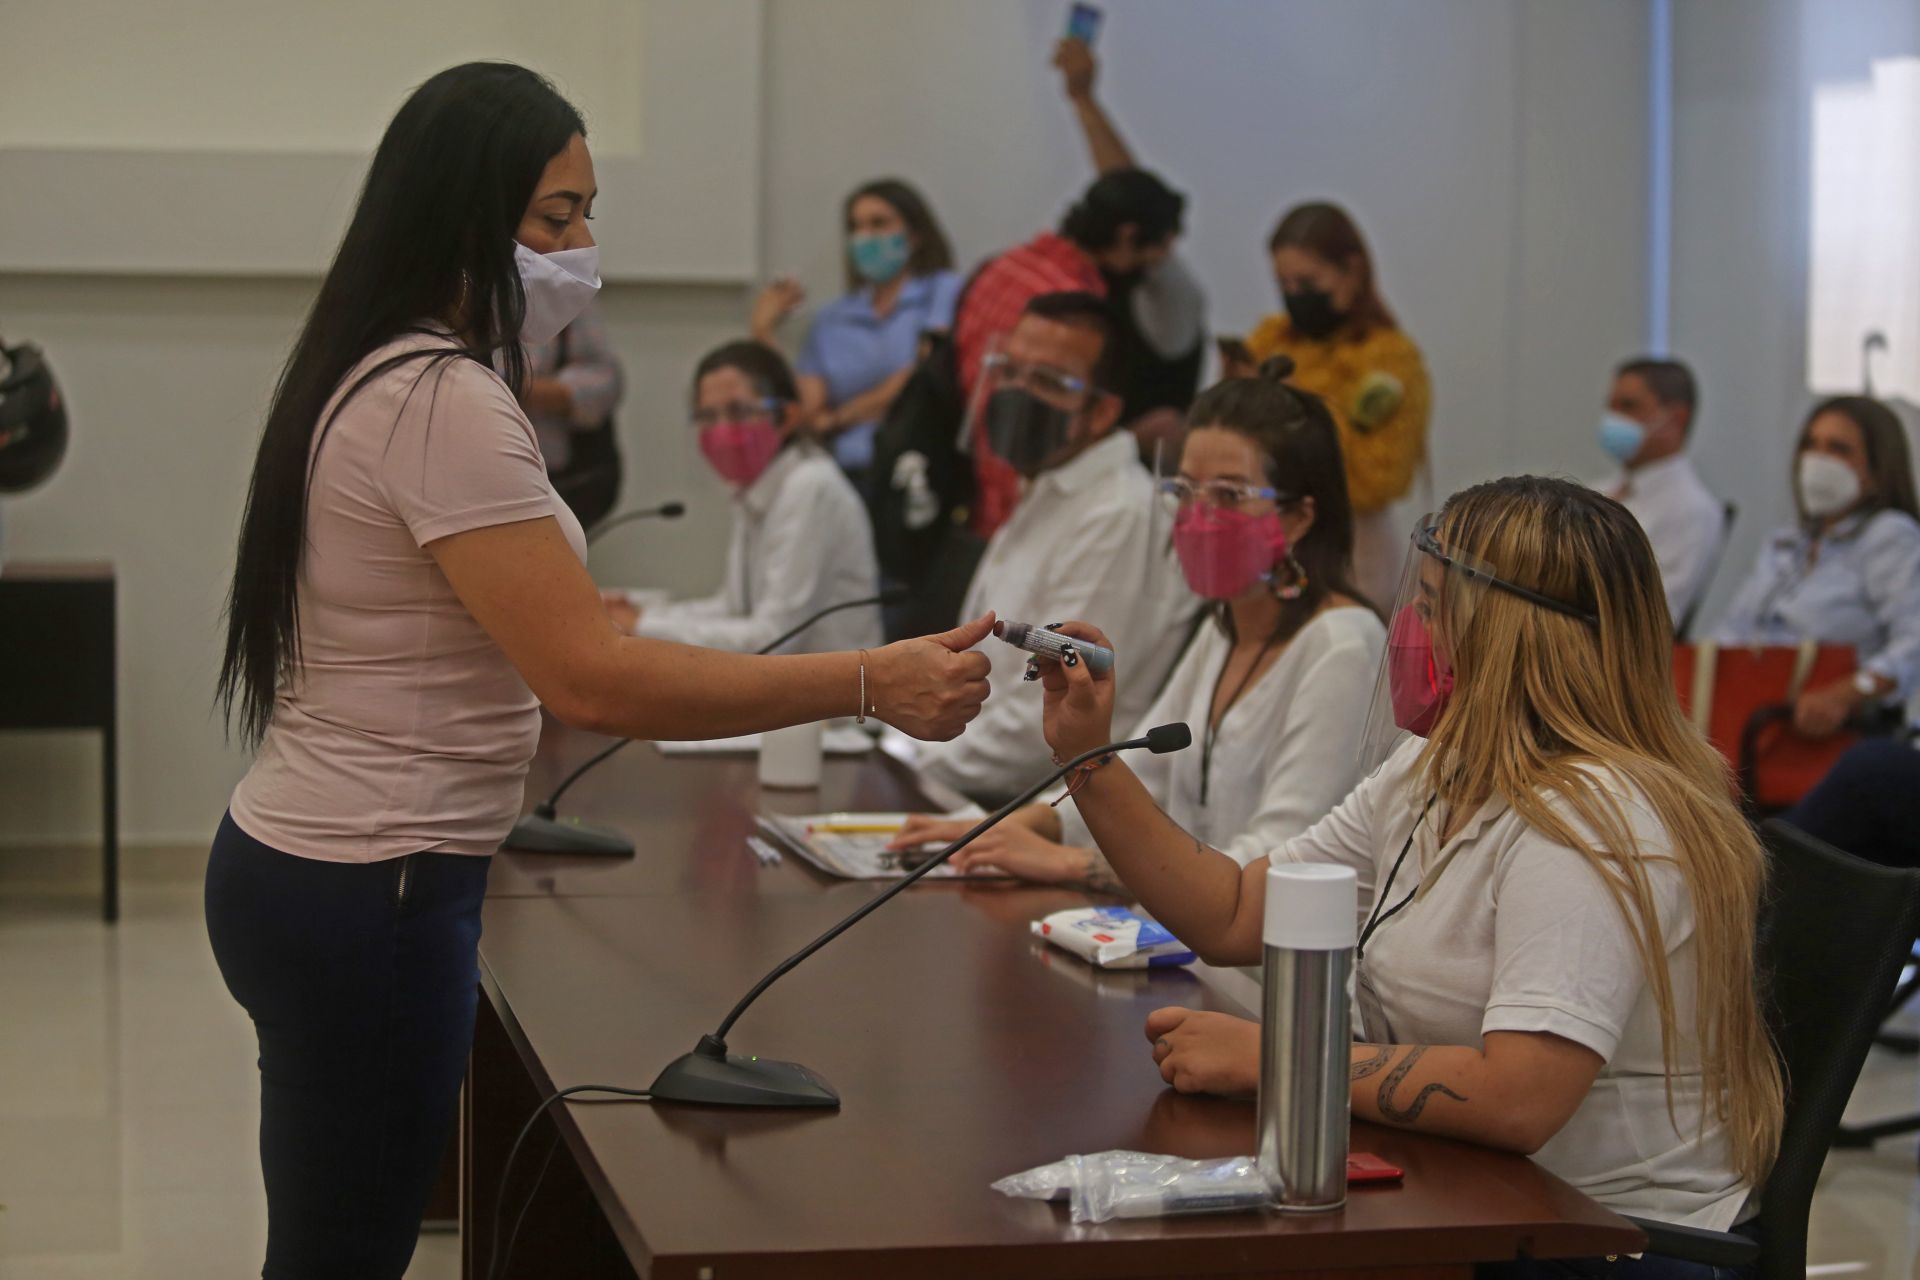 Parties did not allocate $12 million pesos to women's campaigns